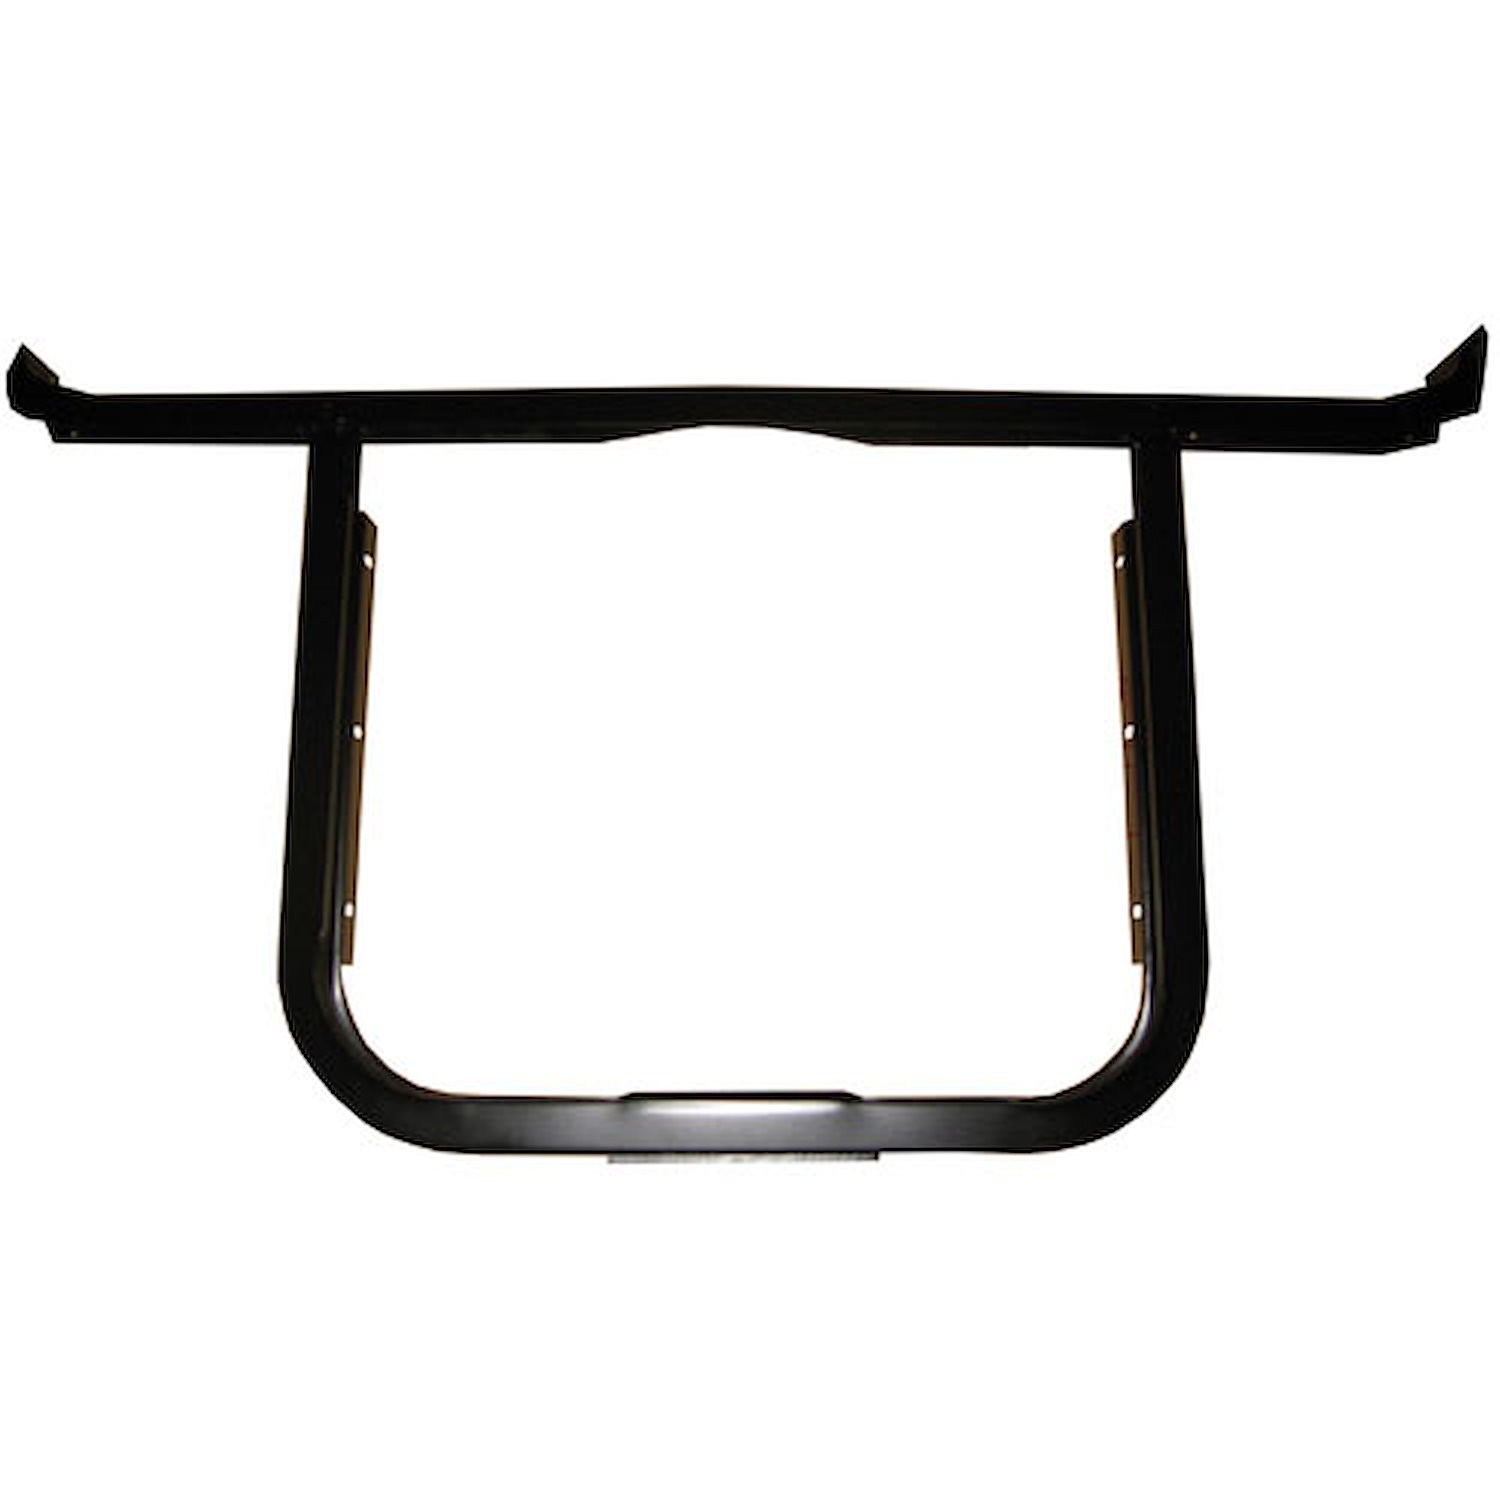 CS13-56 6-Cylinder Radiator Support 1956 Chevy